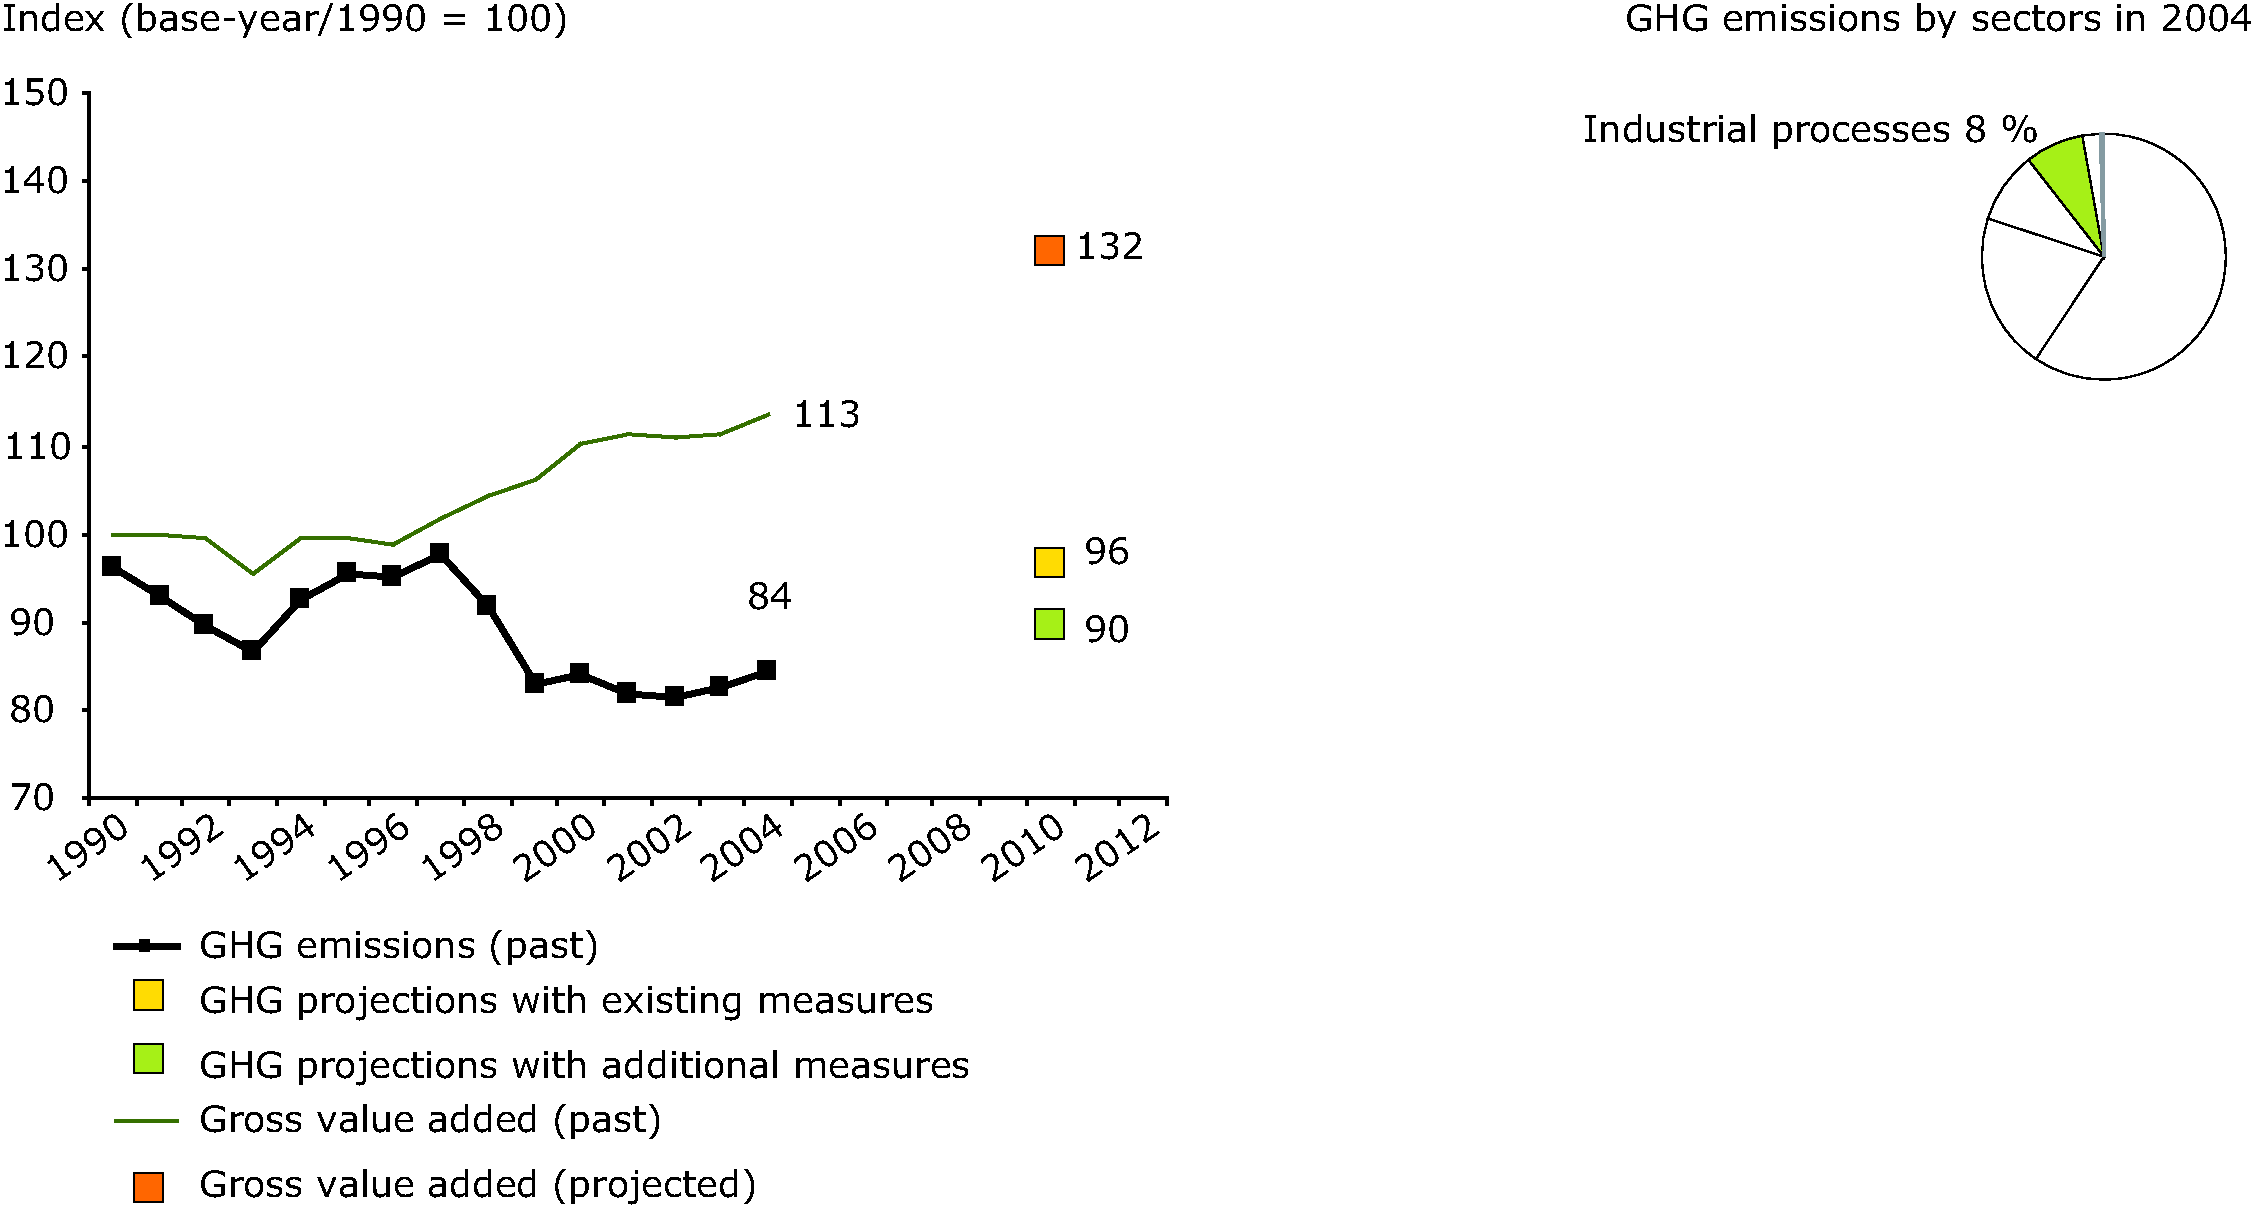 Non-energy related greenhouse gas emissions from industrial processes compared with the value added and energy consumption in the EU-15 1990-2004 and share in total GHG